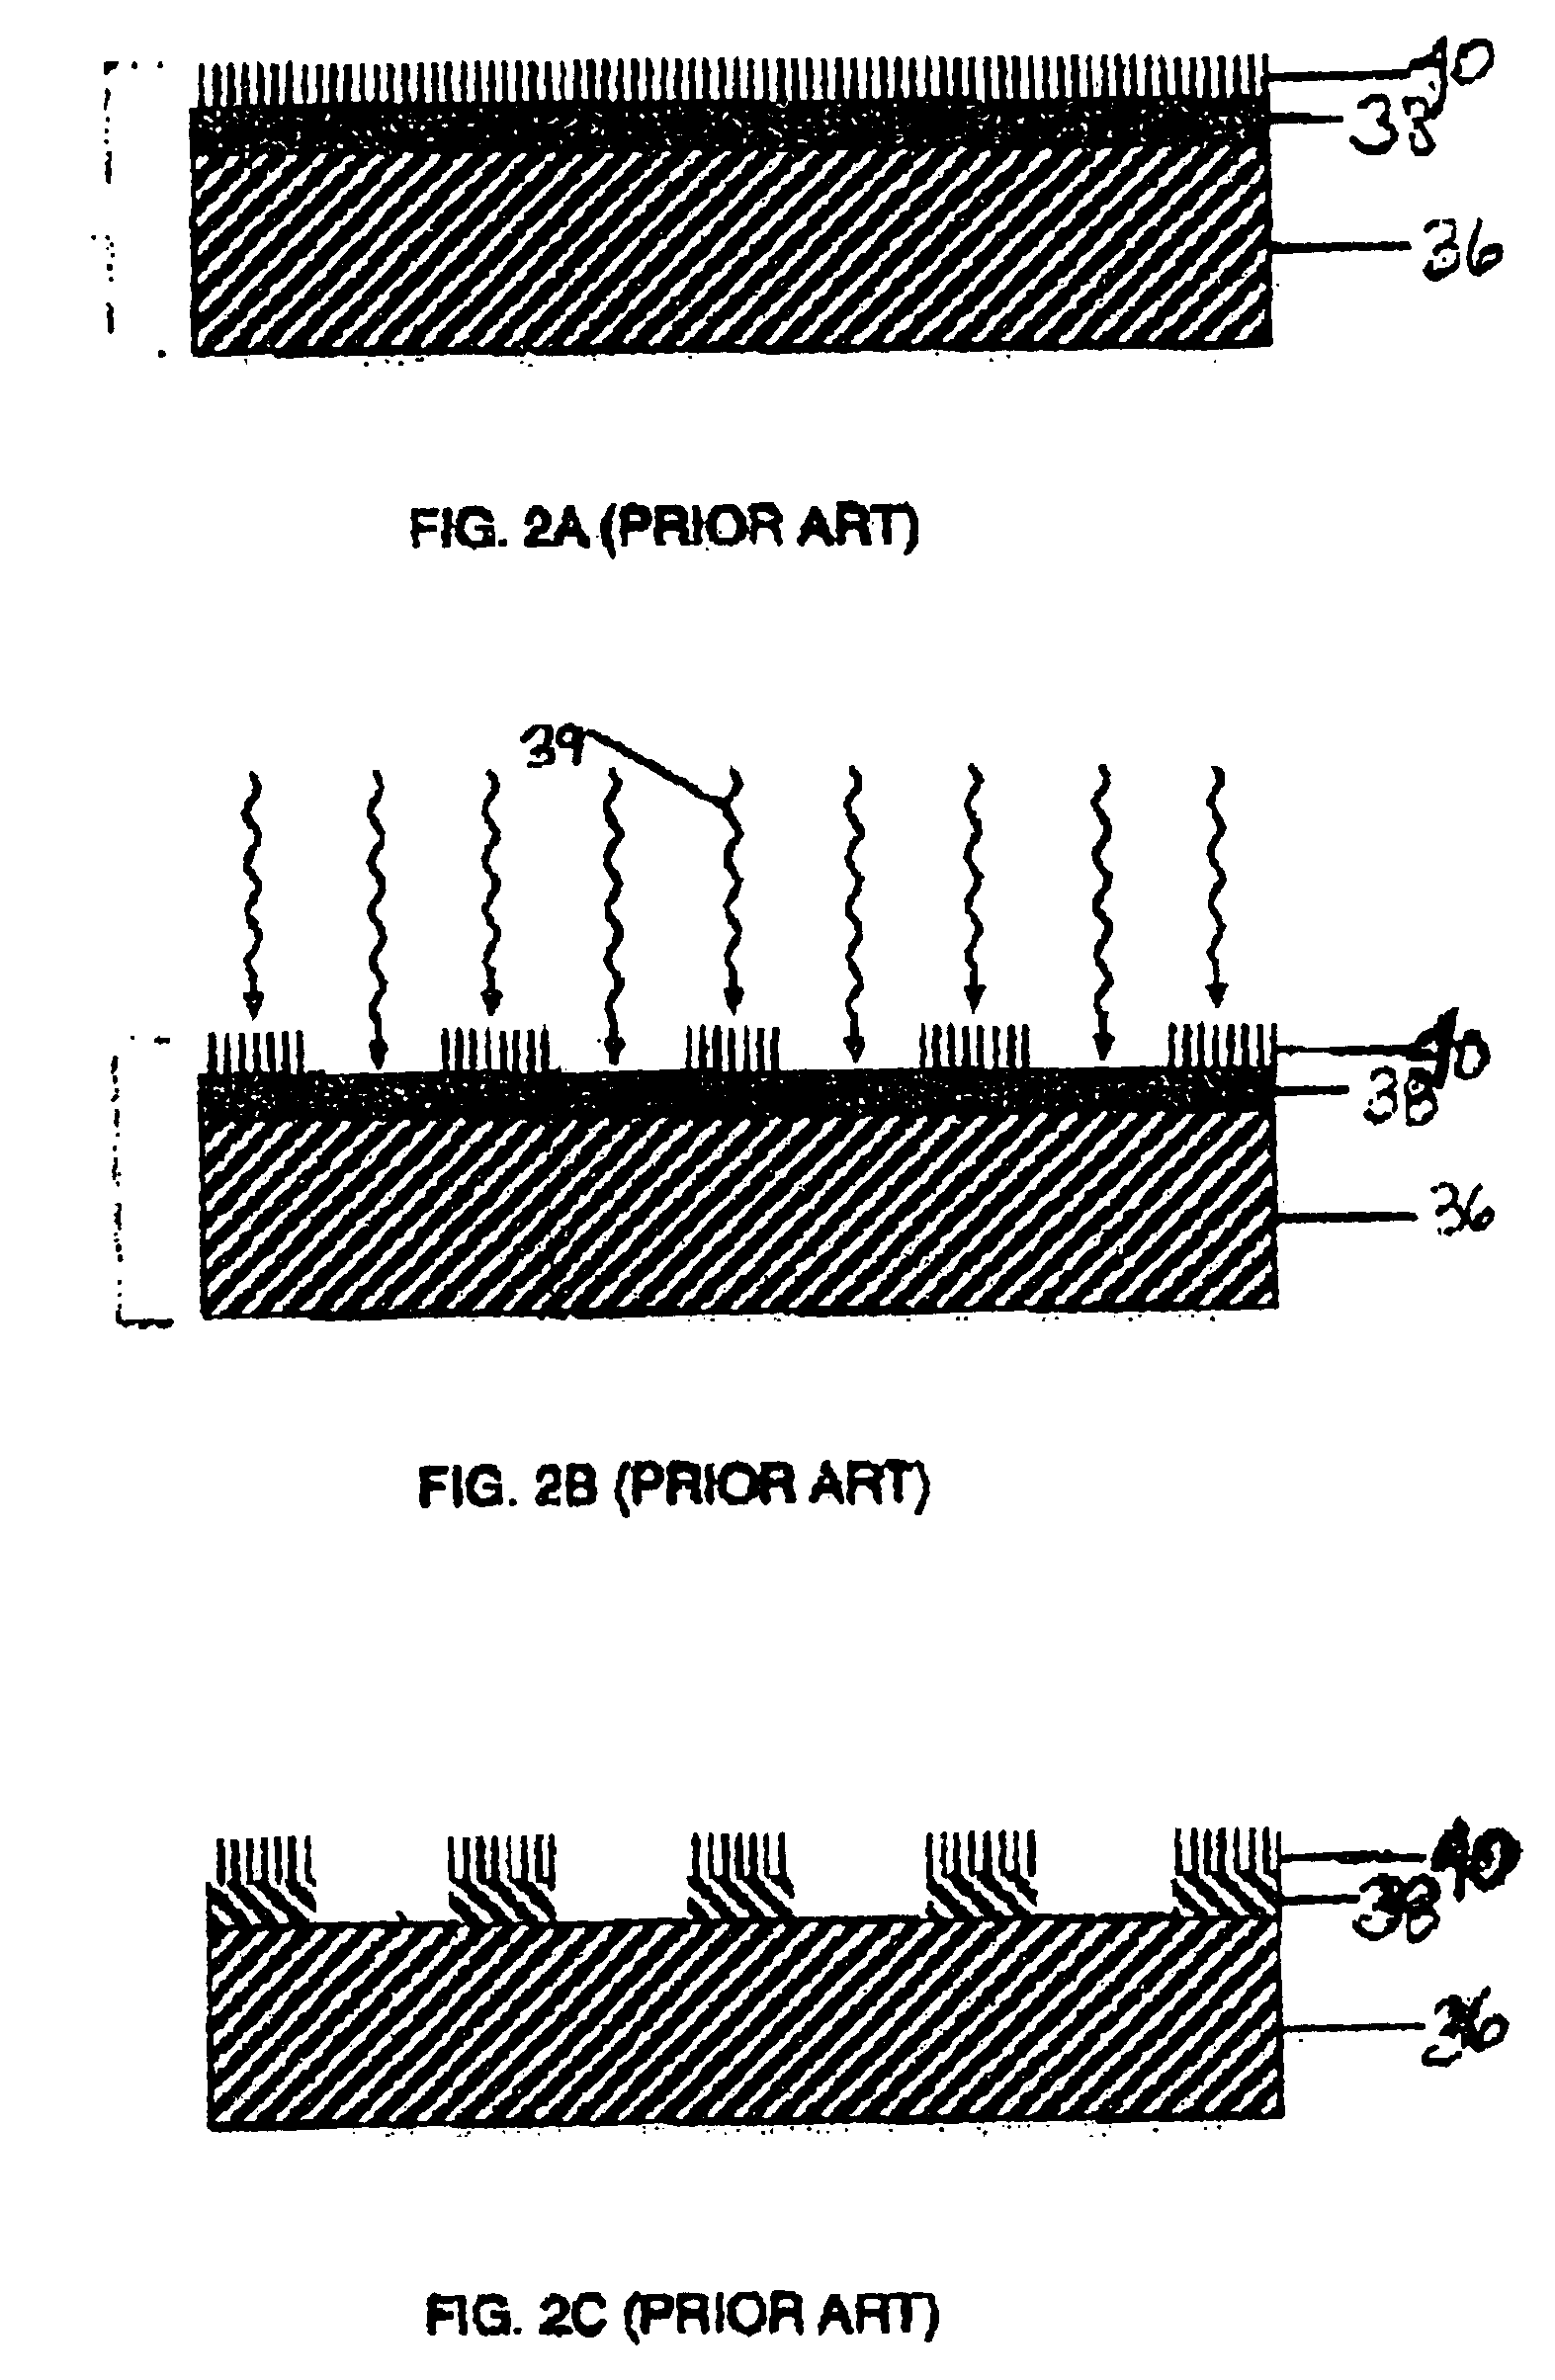 Pre-treatment liquid for use in preparation of an offset printing plate using direct inkjet CTP